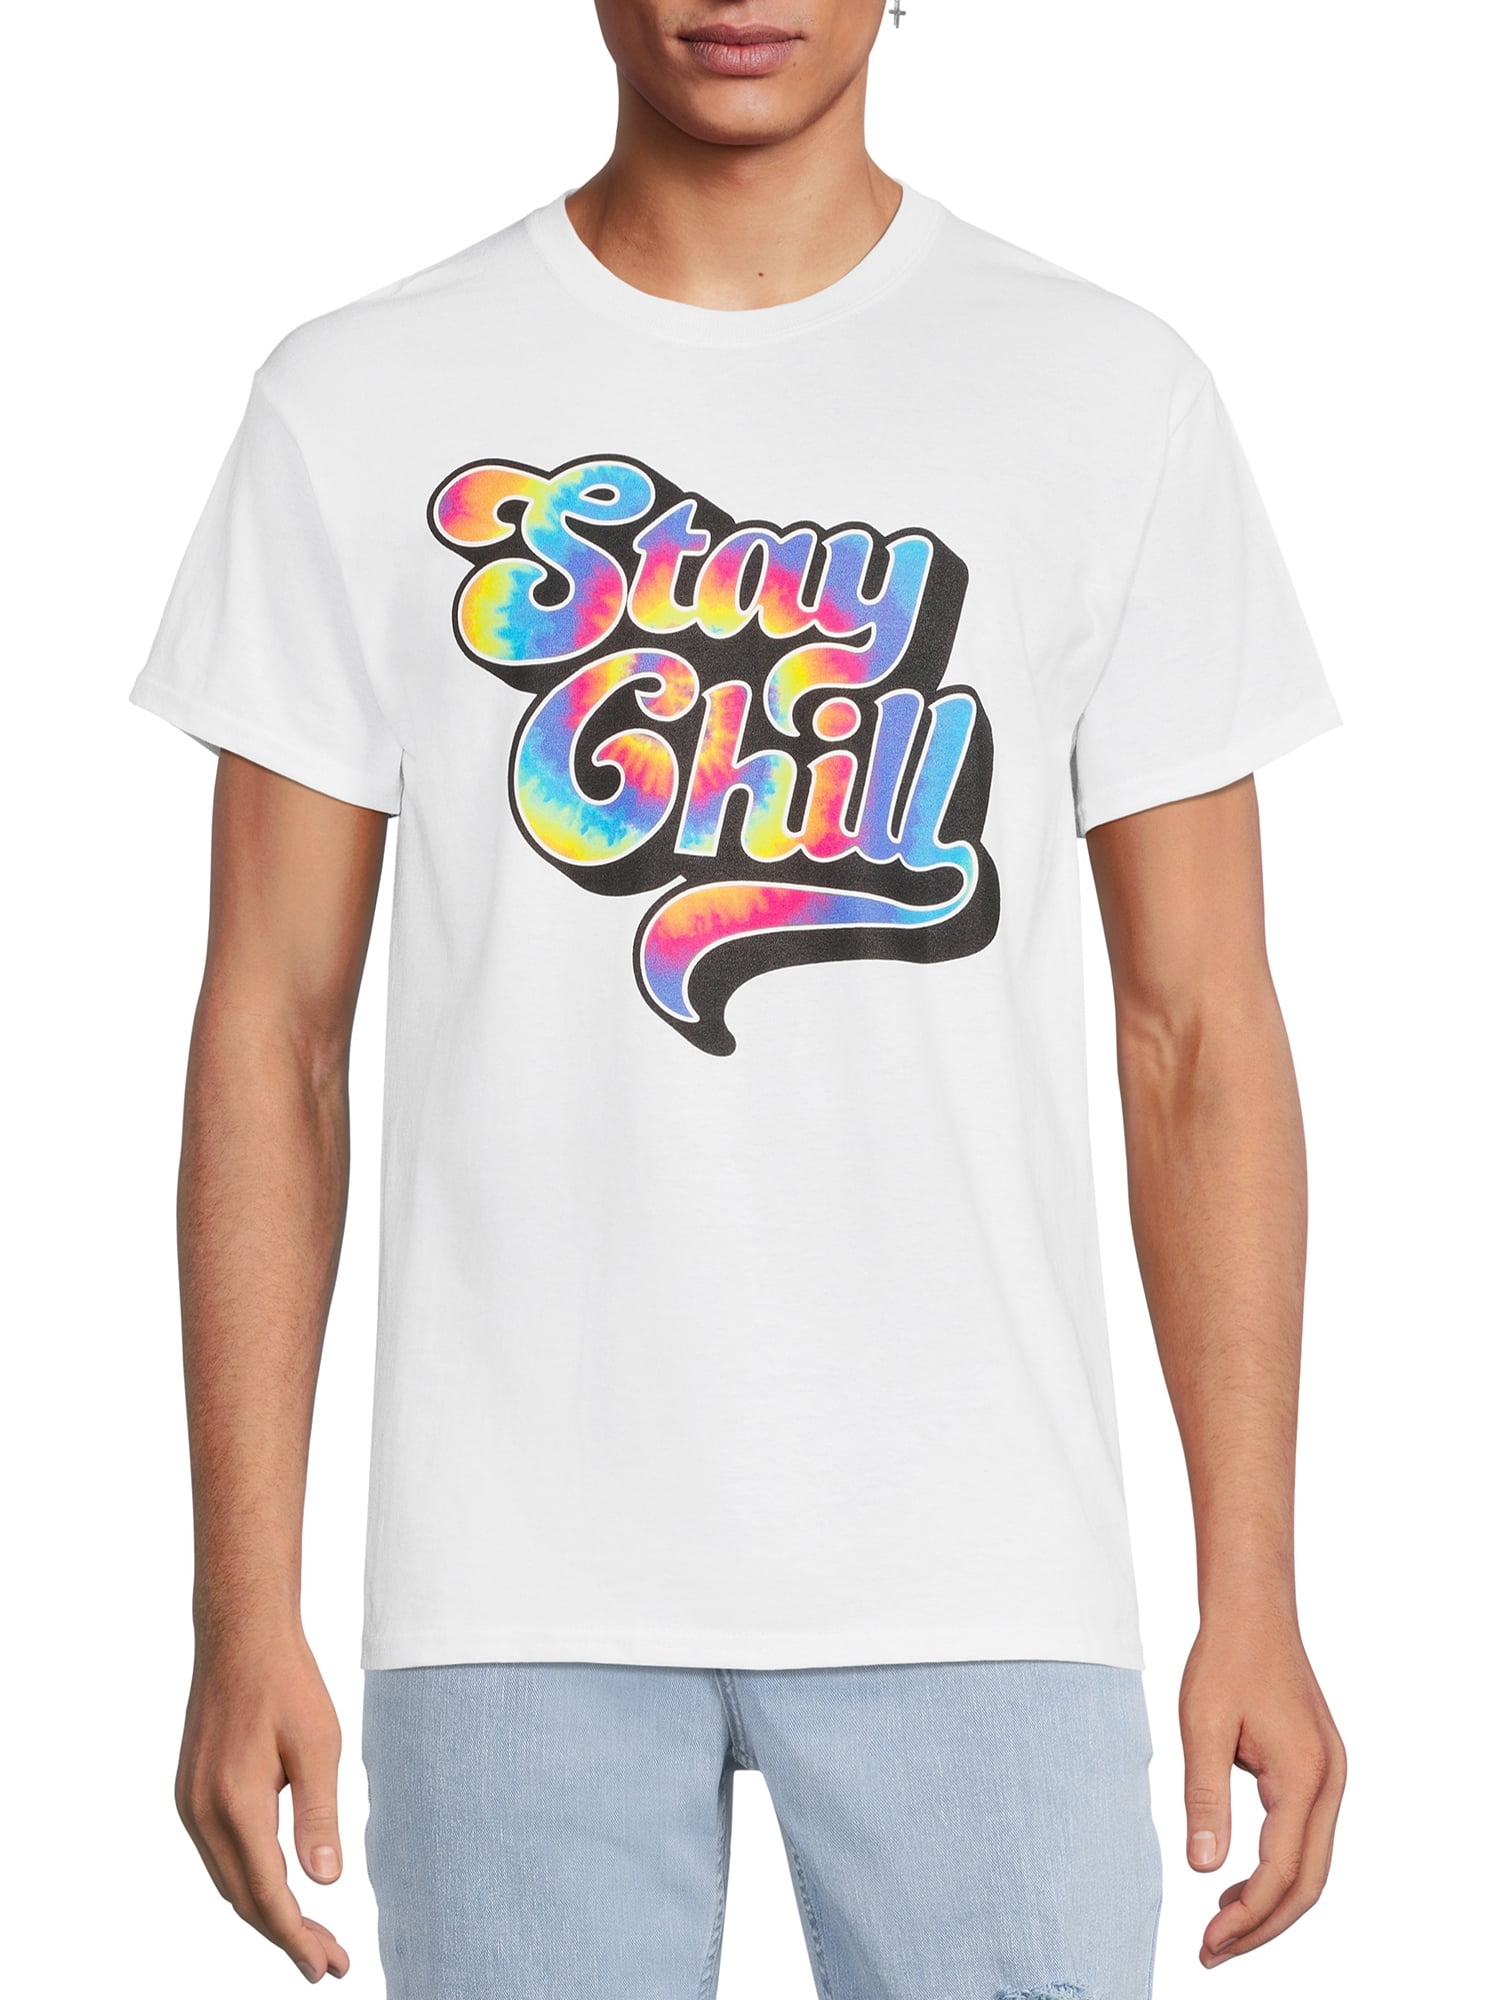 Spicy Cold Apparel Just Chillin T-Shirt Graphic Shirts Funny Unisex Shirt